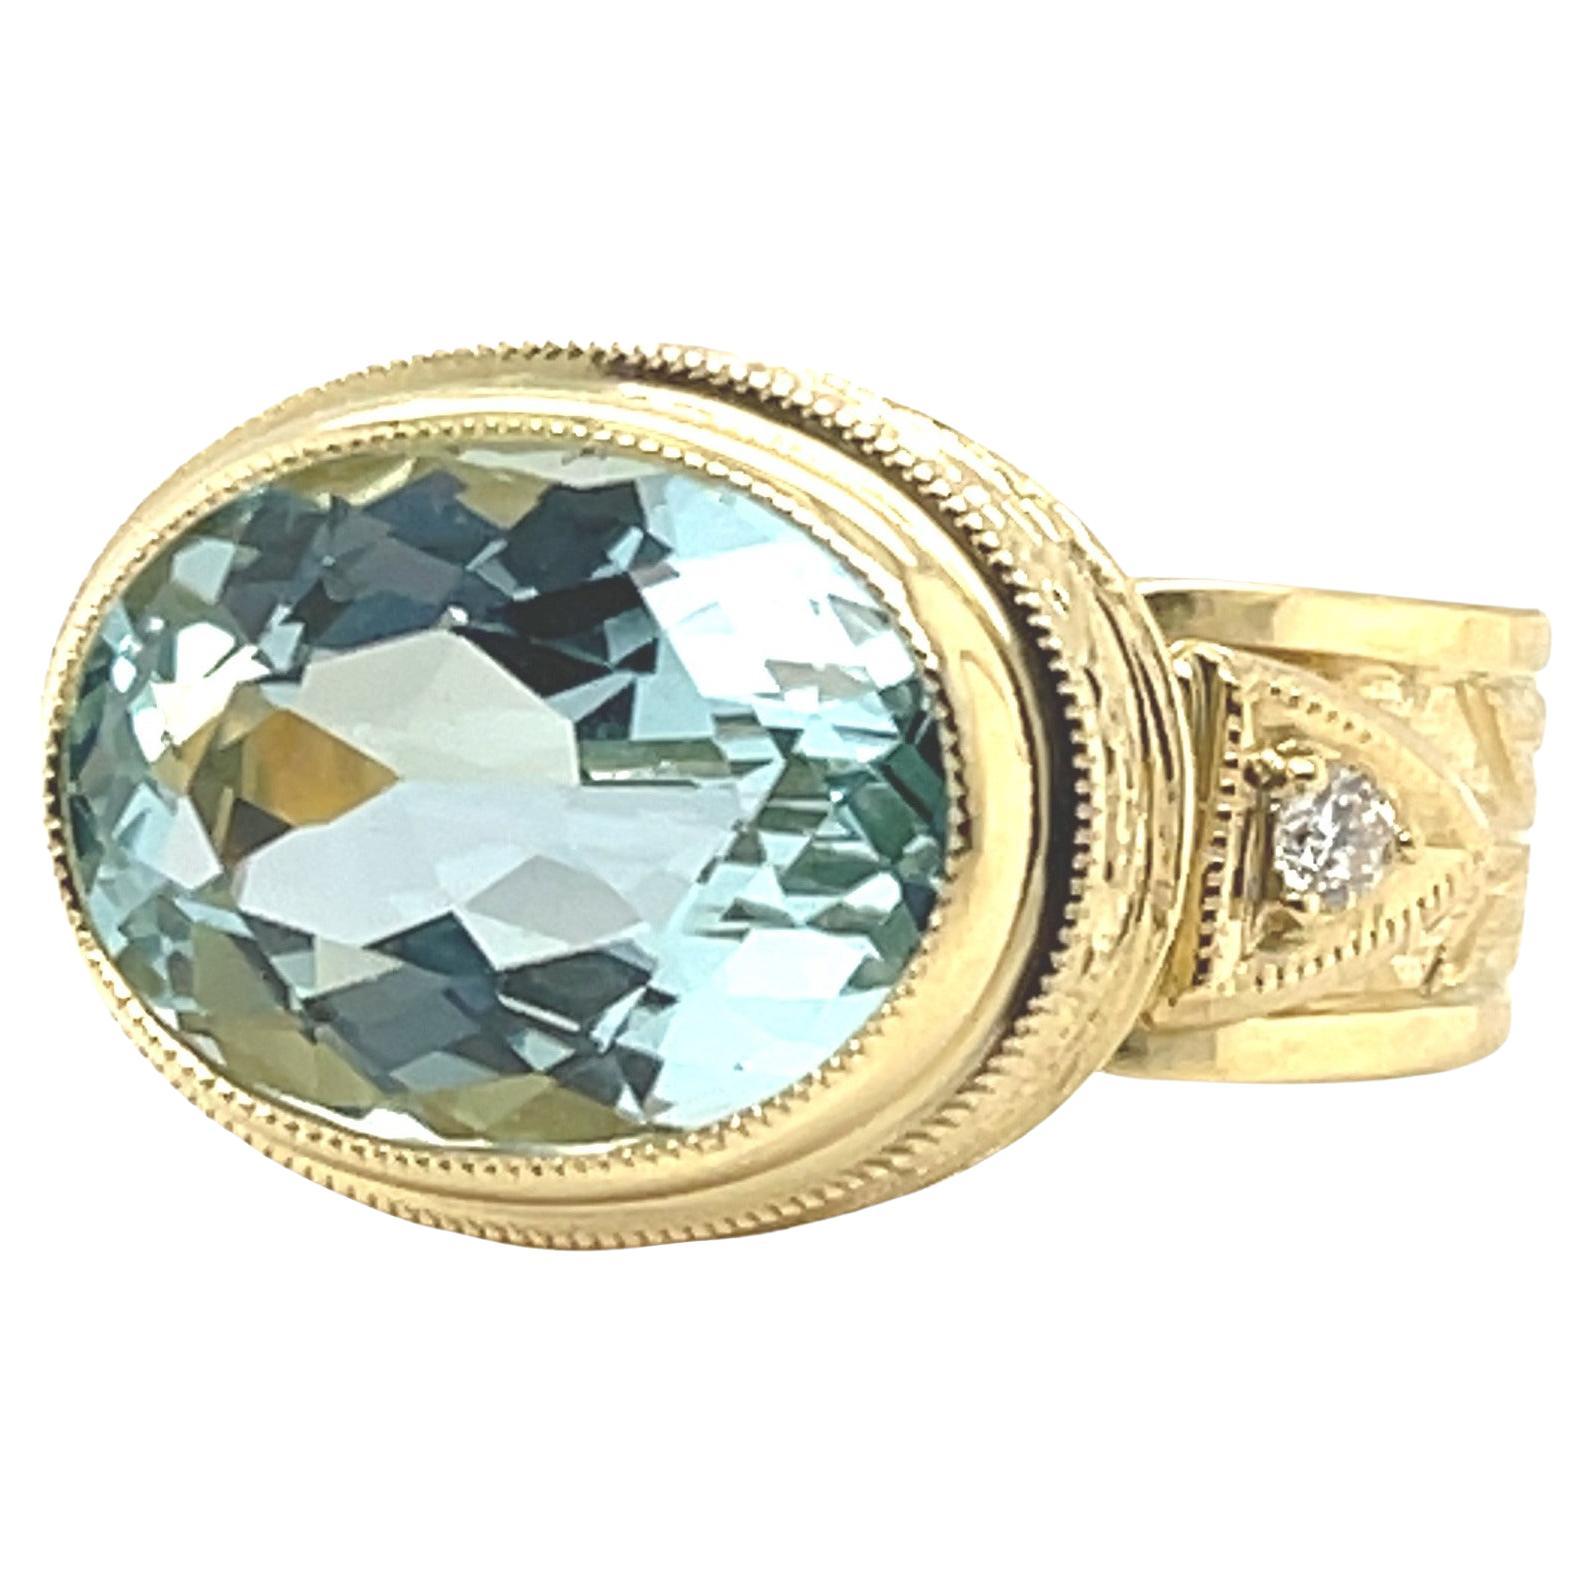 This beautiful handmade ring features a sparkling 6.16 carat oval aquamarine set in 18k yellow gold with diamonds! The center stone has classic aquamarine color - bright crystalline blue so easily recognizable as March's birthstone. The oval is set